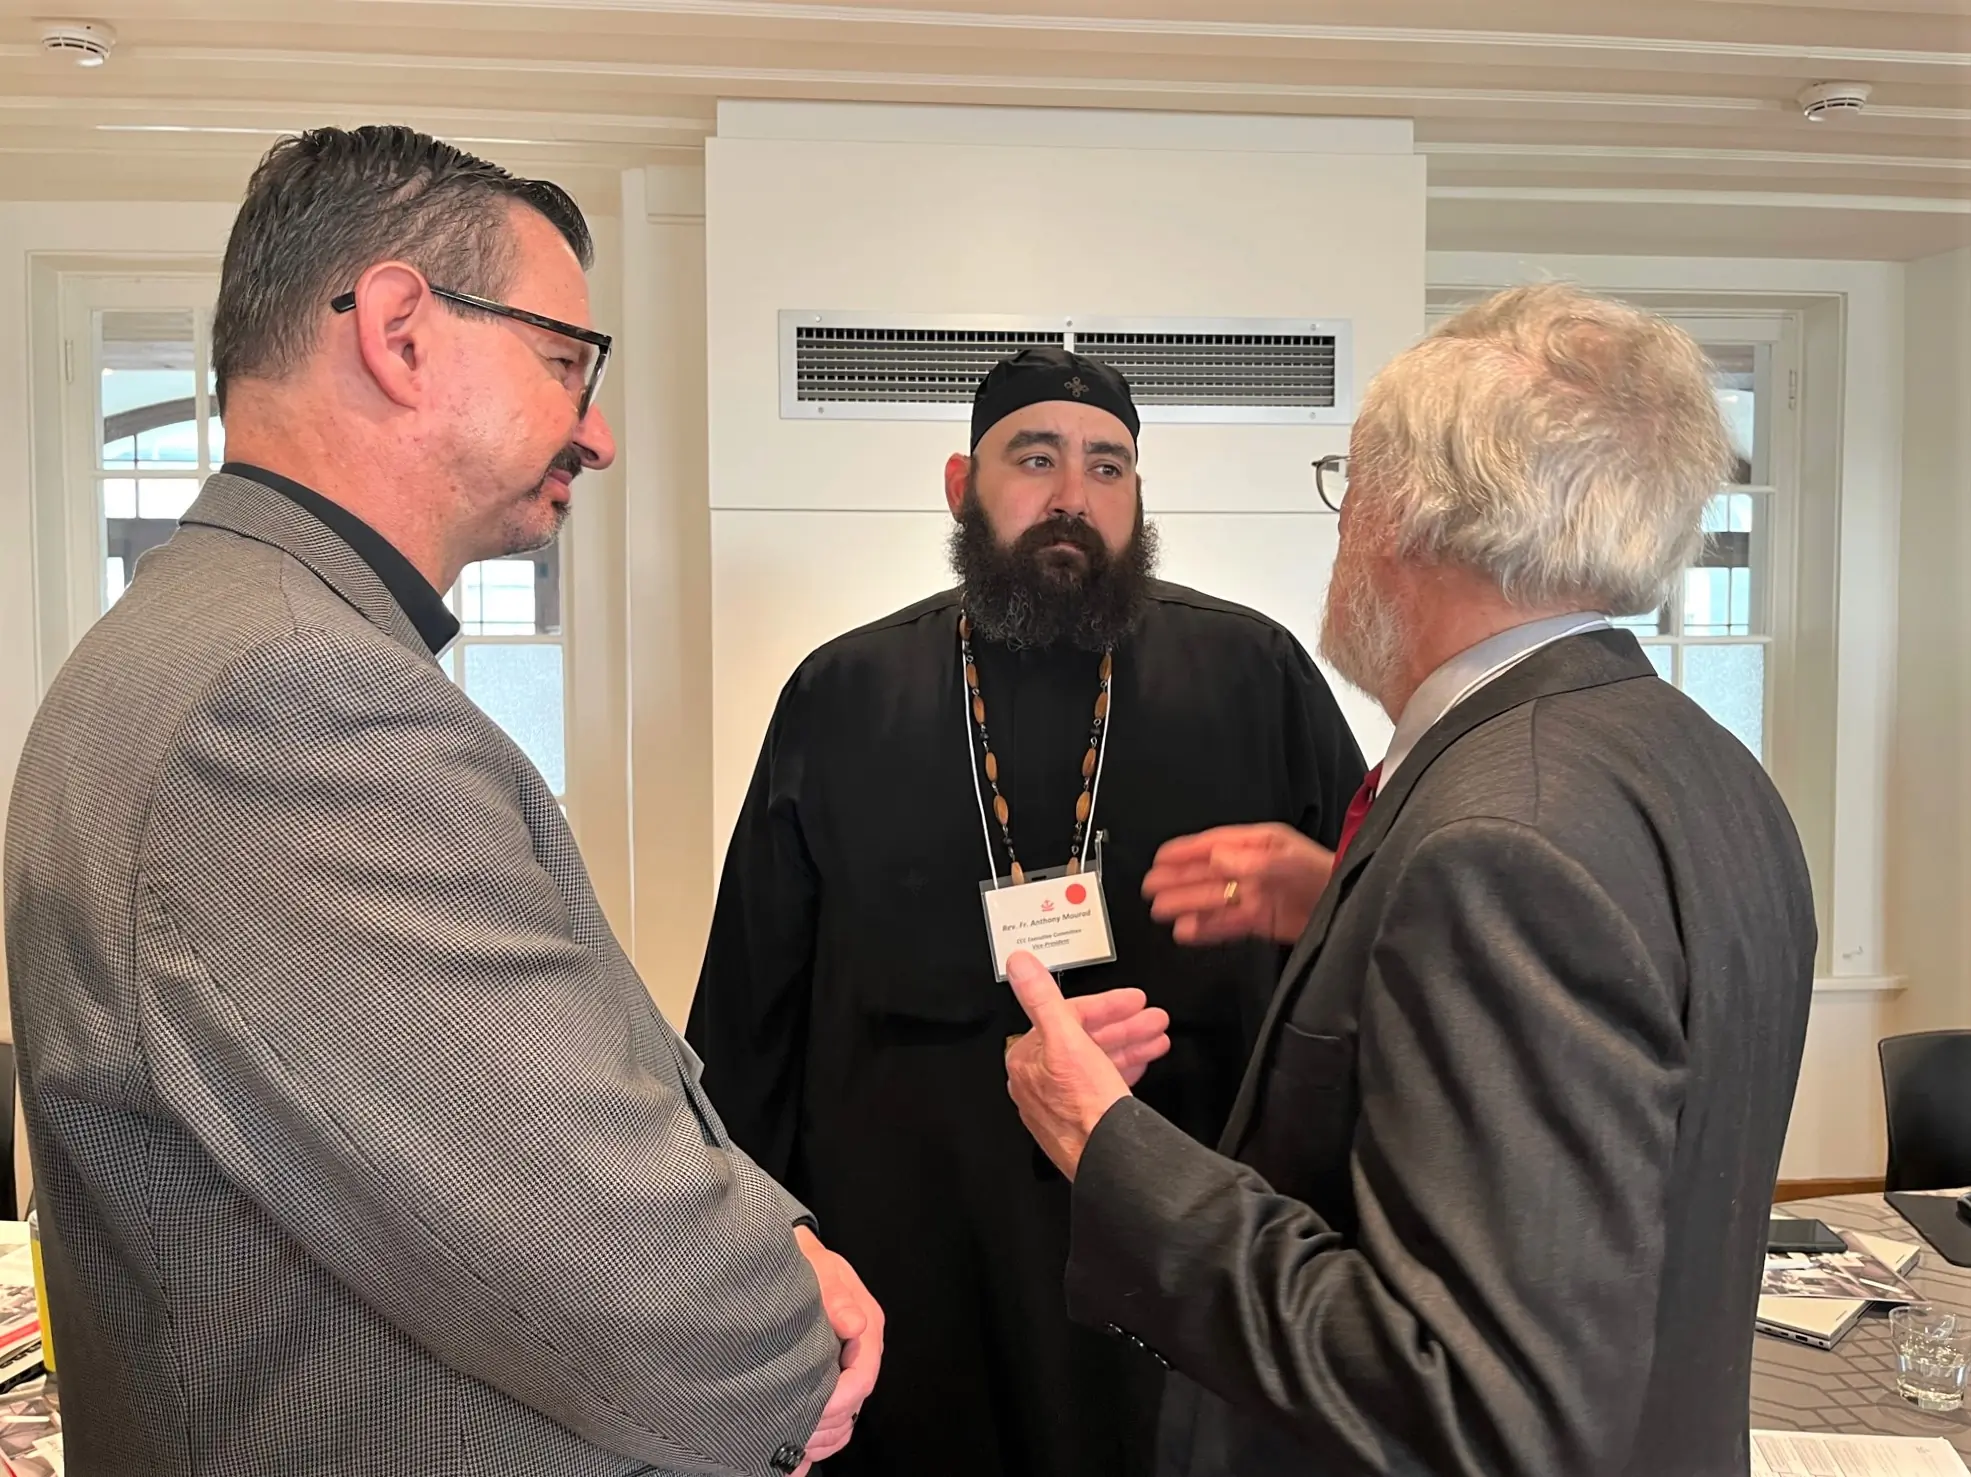 Sharing family news and praying together: highlights from the first day of the Canadian Council of Churches' Governing Board meeting at Le Monastère des Augustines in Quebec